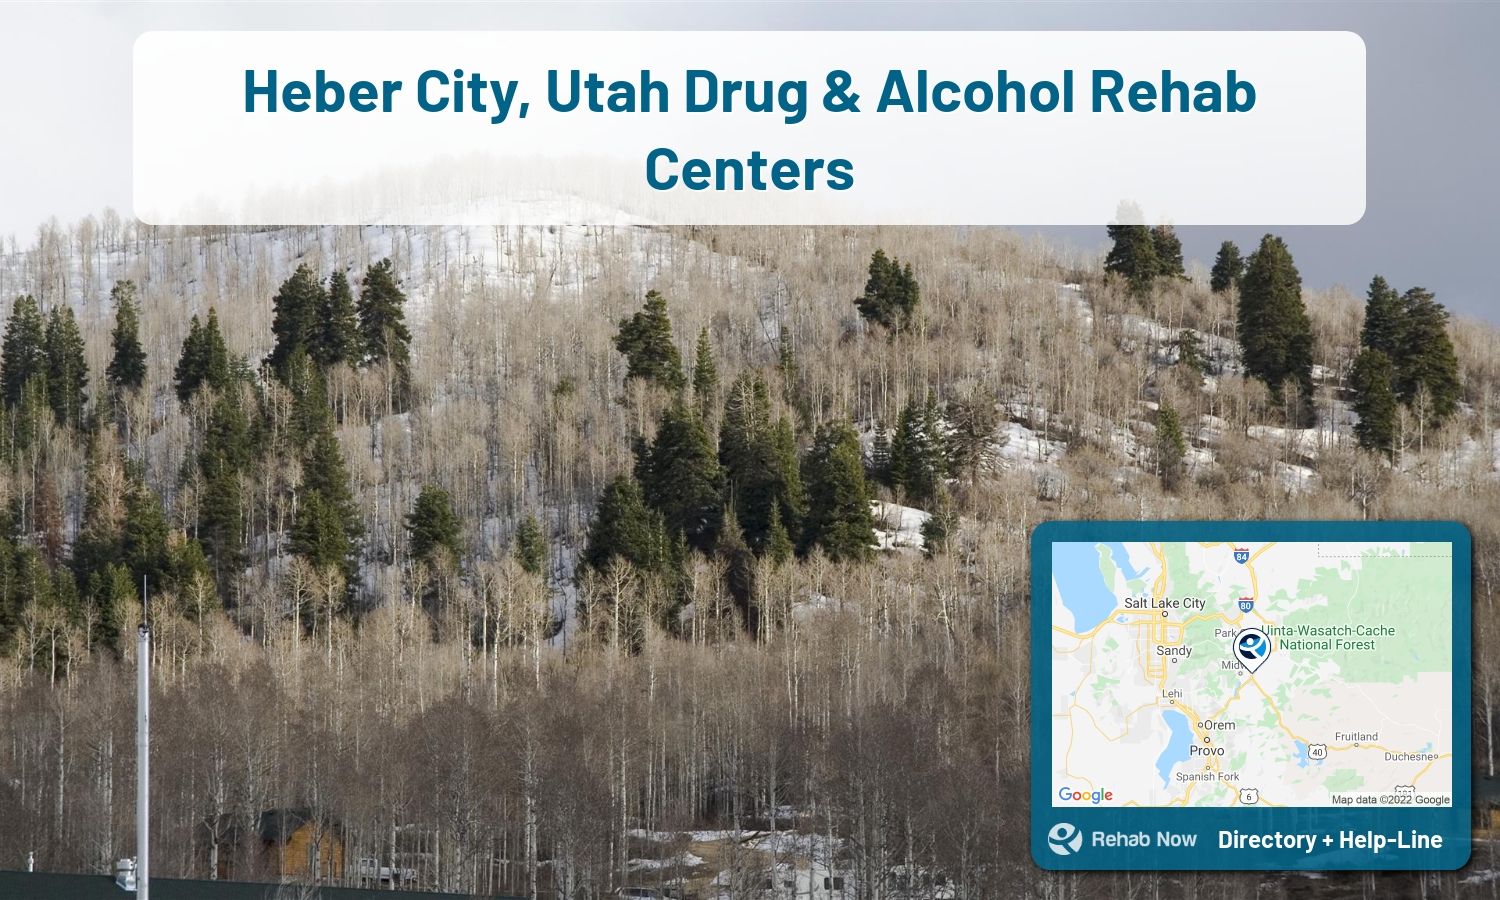 Our experts can help you find treatment now in Heber City, Utah. We list drug rehab and alcohol centers in Utah.